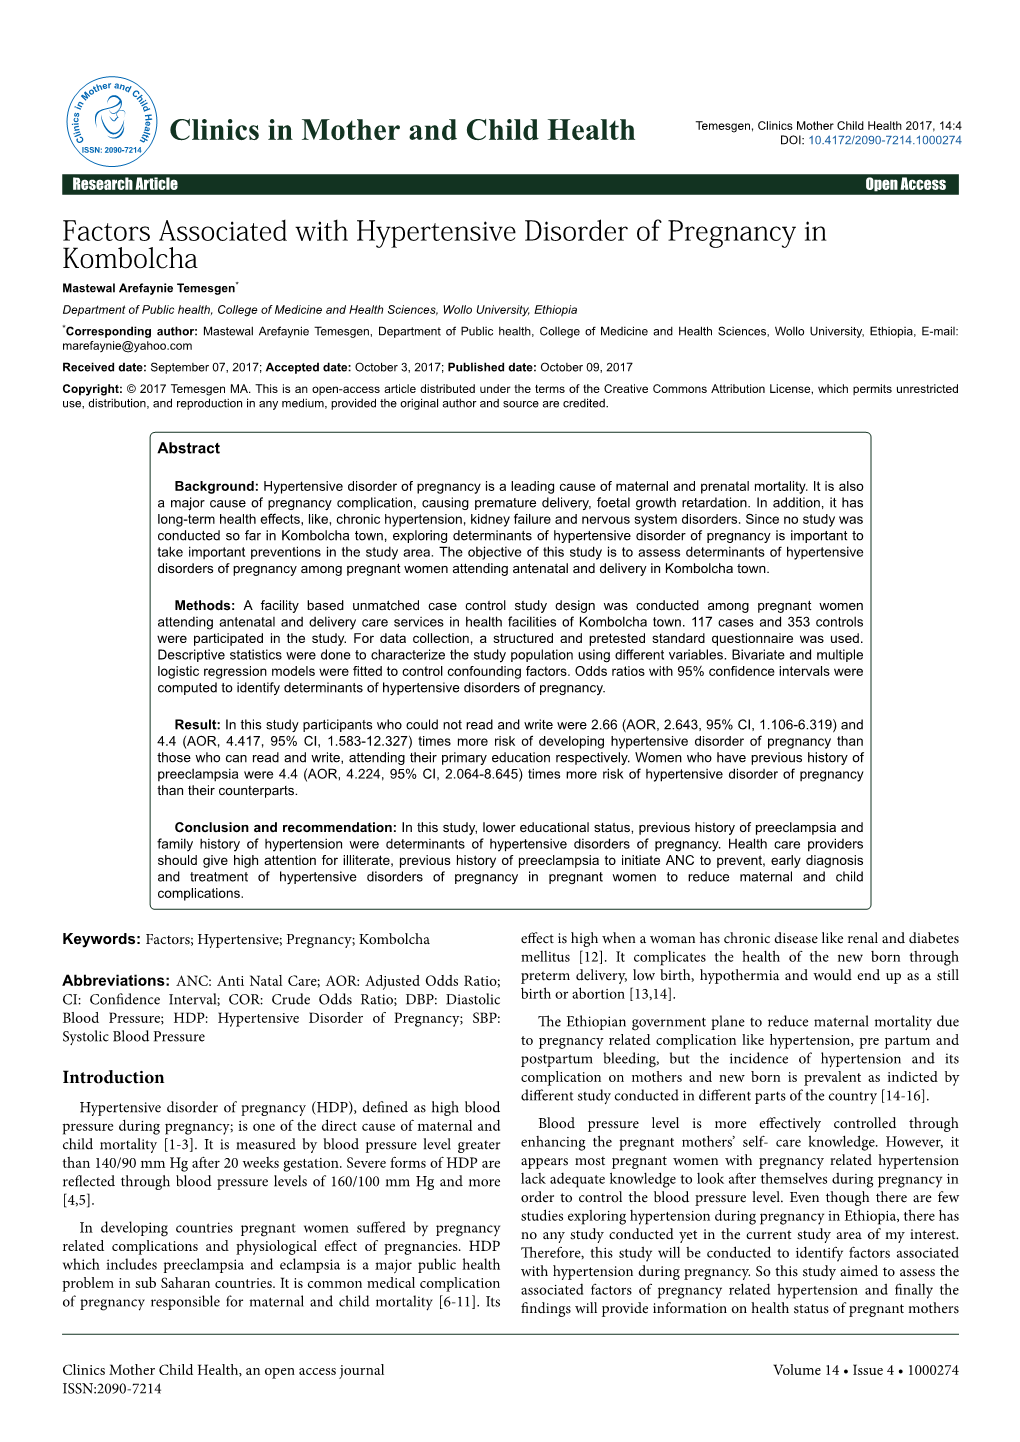 Factors Associated with Hypertensive Disorder of Pregnancy in Kombolcha